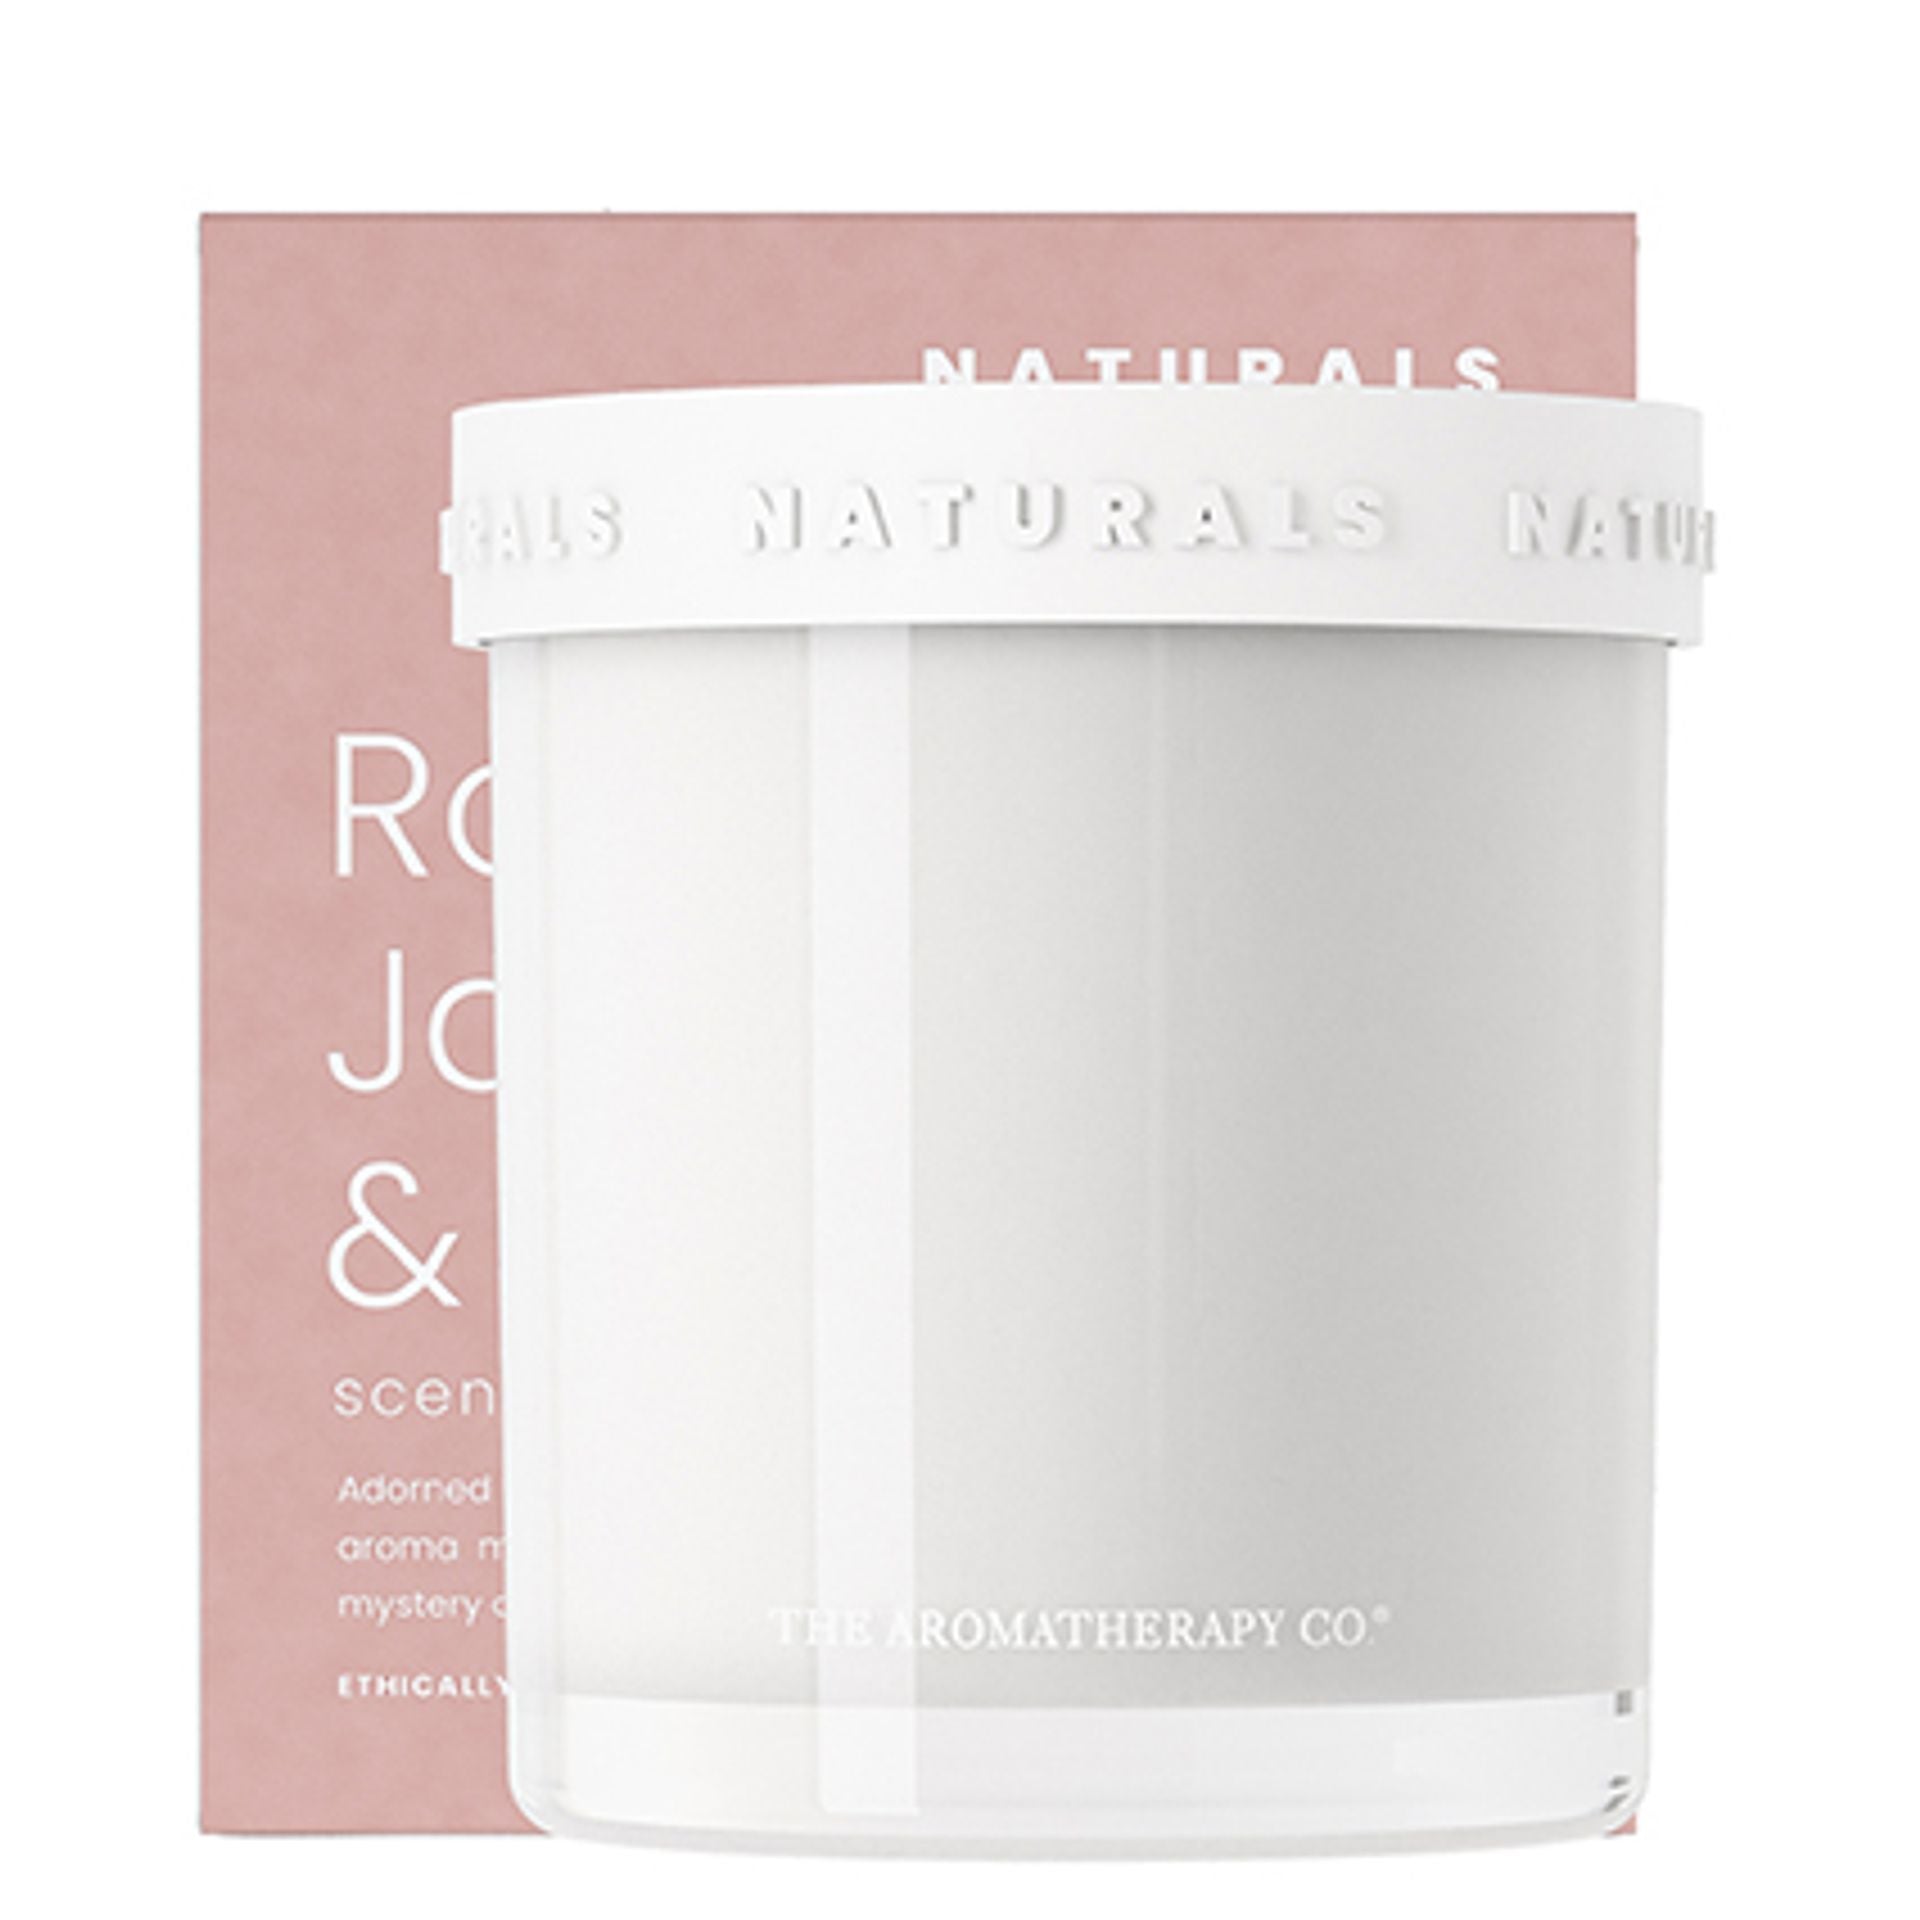 The Aromatherapy Co Naturals Rose Jasmine & Oud Candle